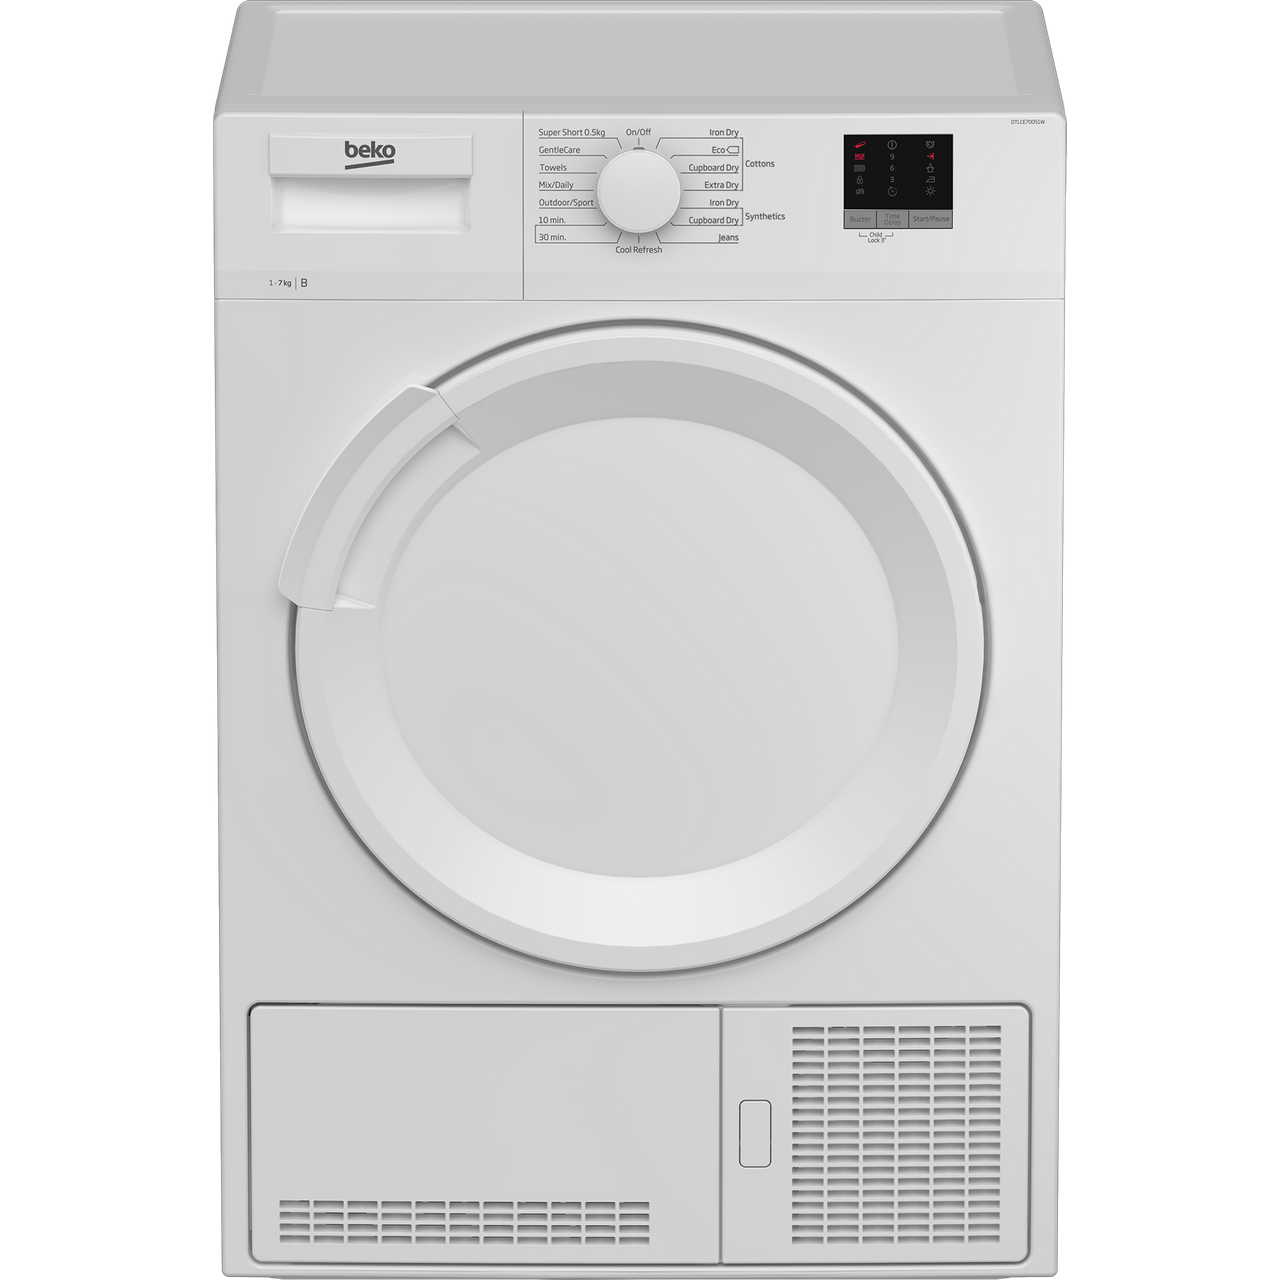 Beko DTLCE70051W 7Kg Condenser Tumble Dryer Review